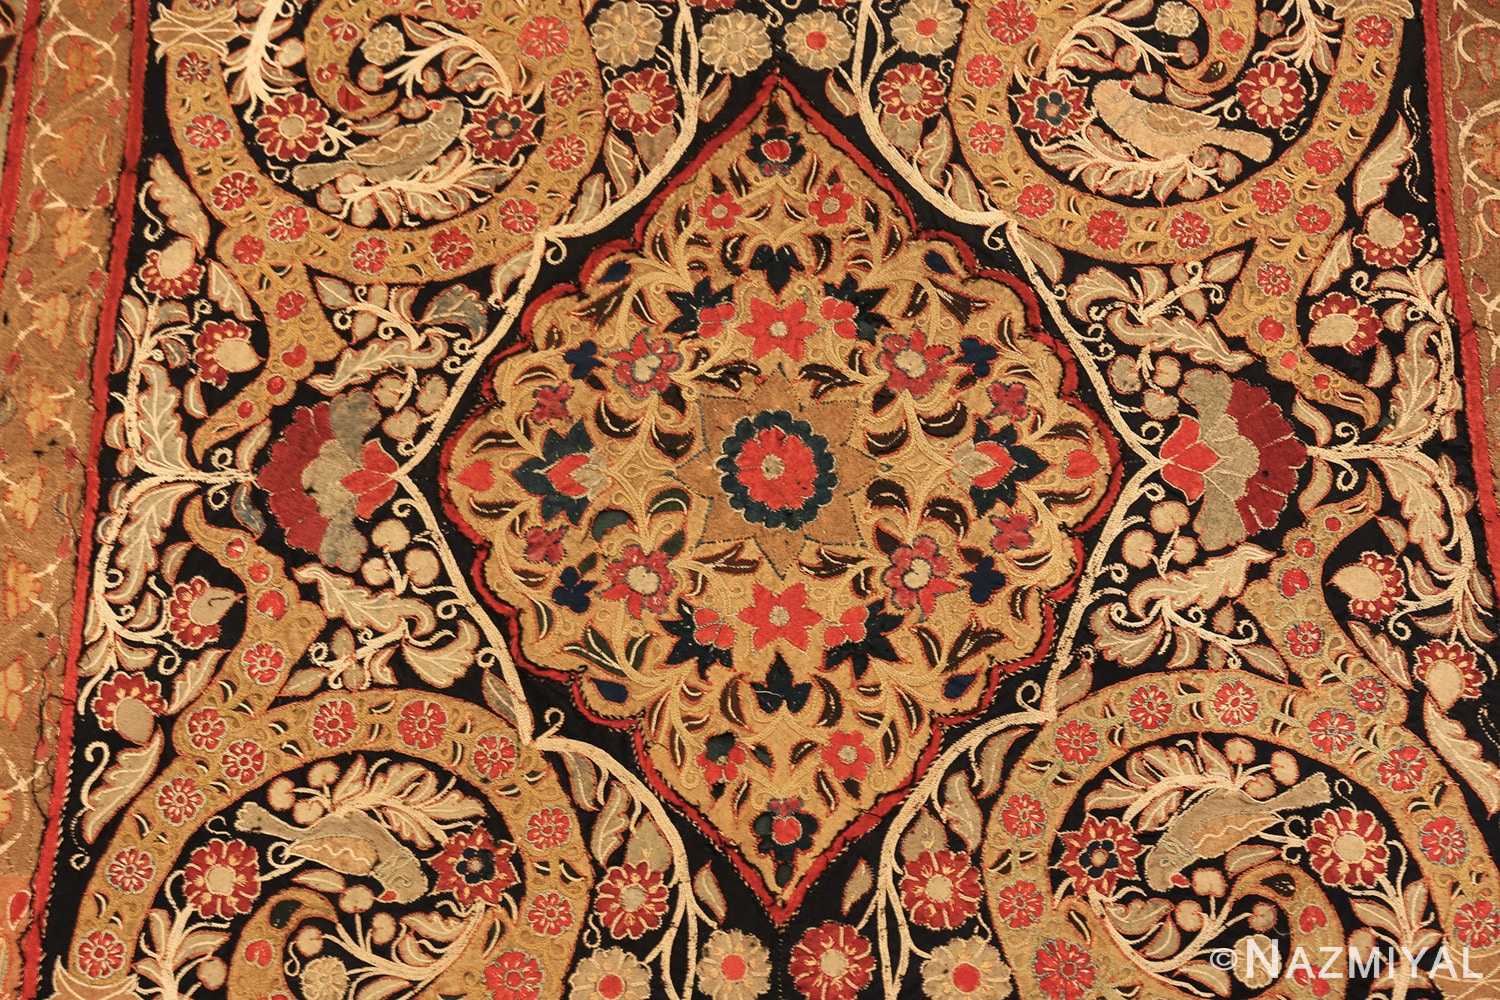 Field Antique Persian Silk Rashi embroidery textile 70225 by Nazmiyal